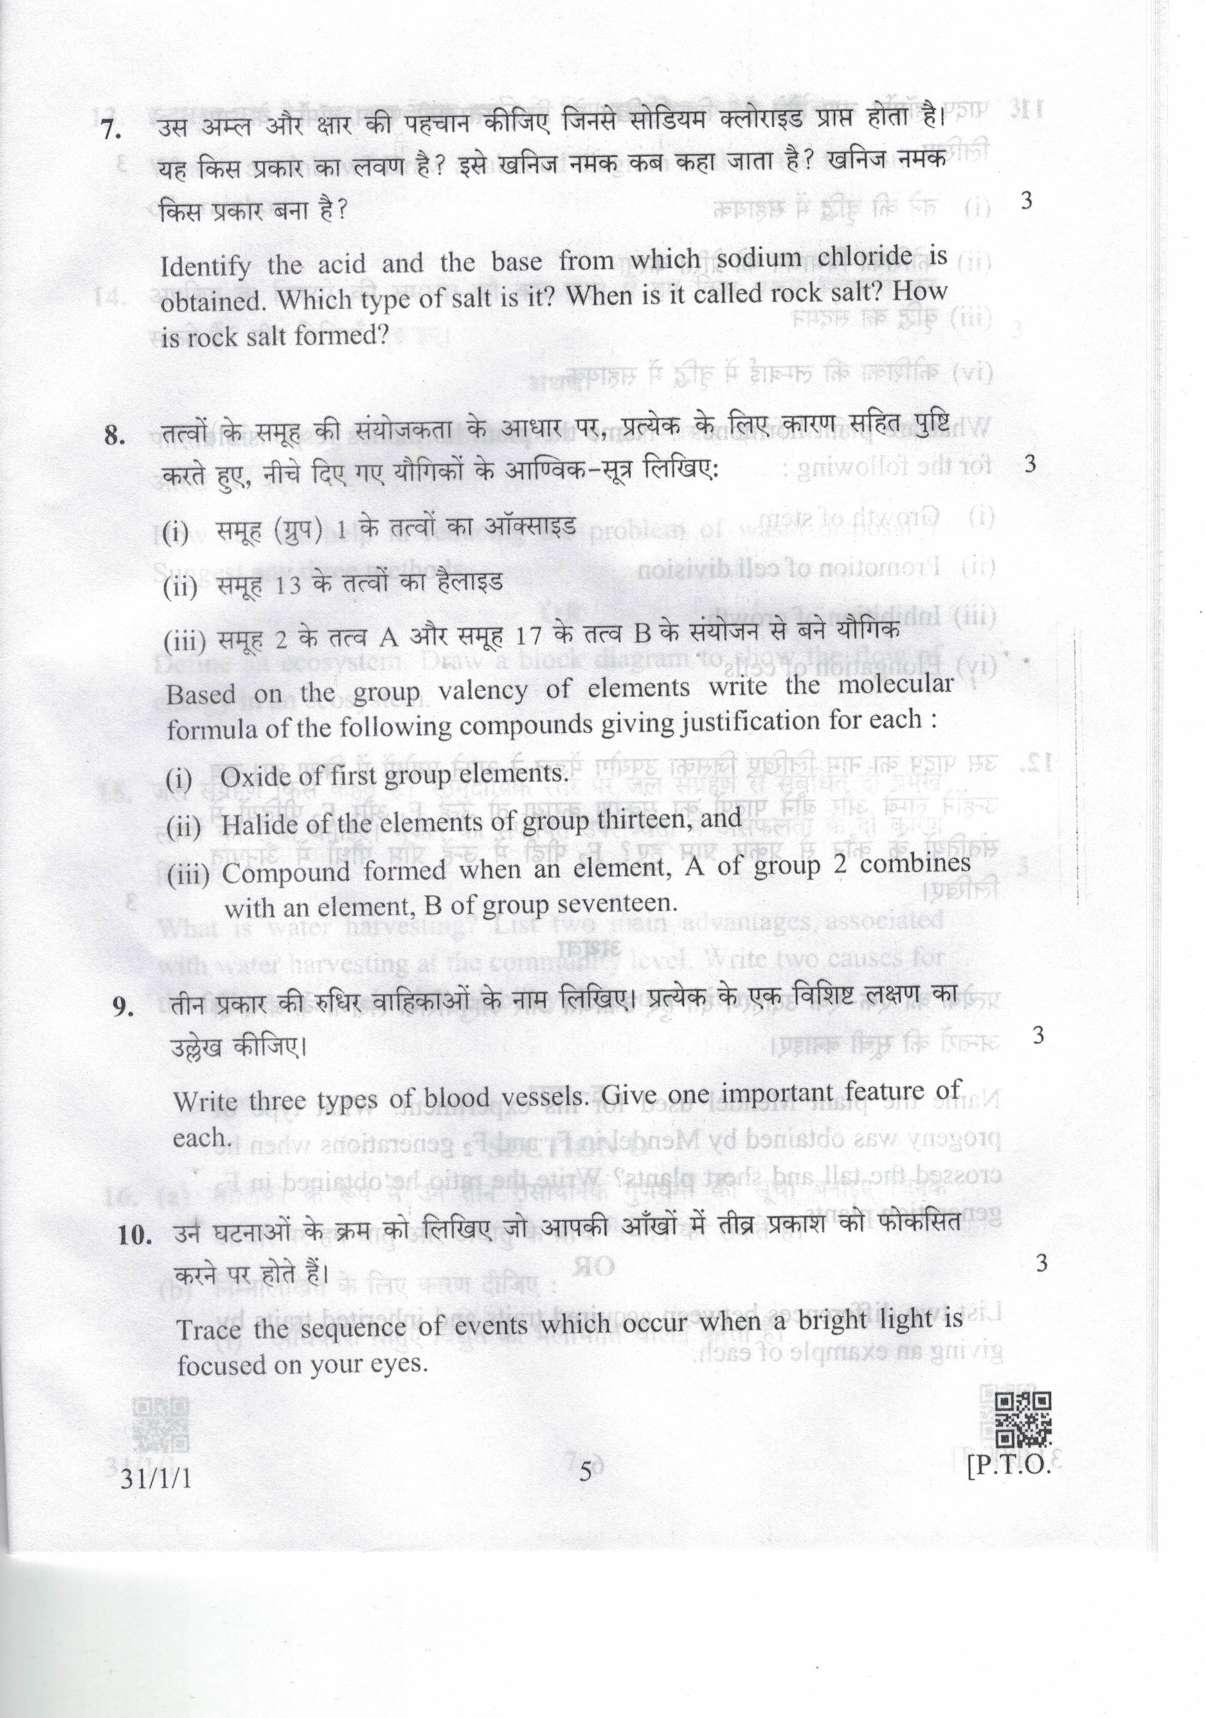 CBSE Class 10 31-1-1 Science 2019 Question Paper - Page 5